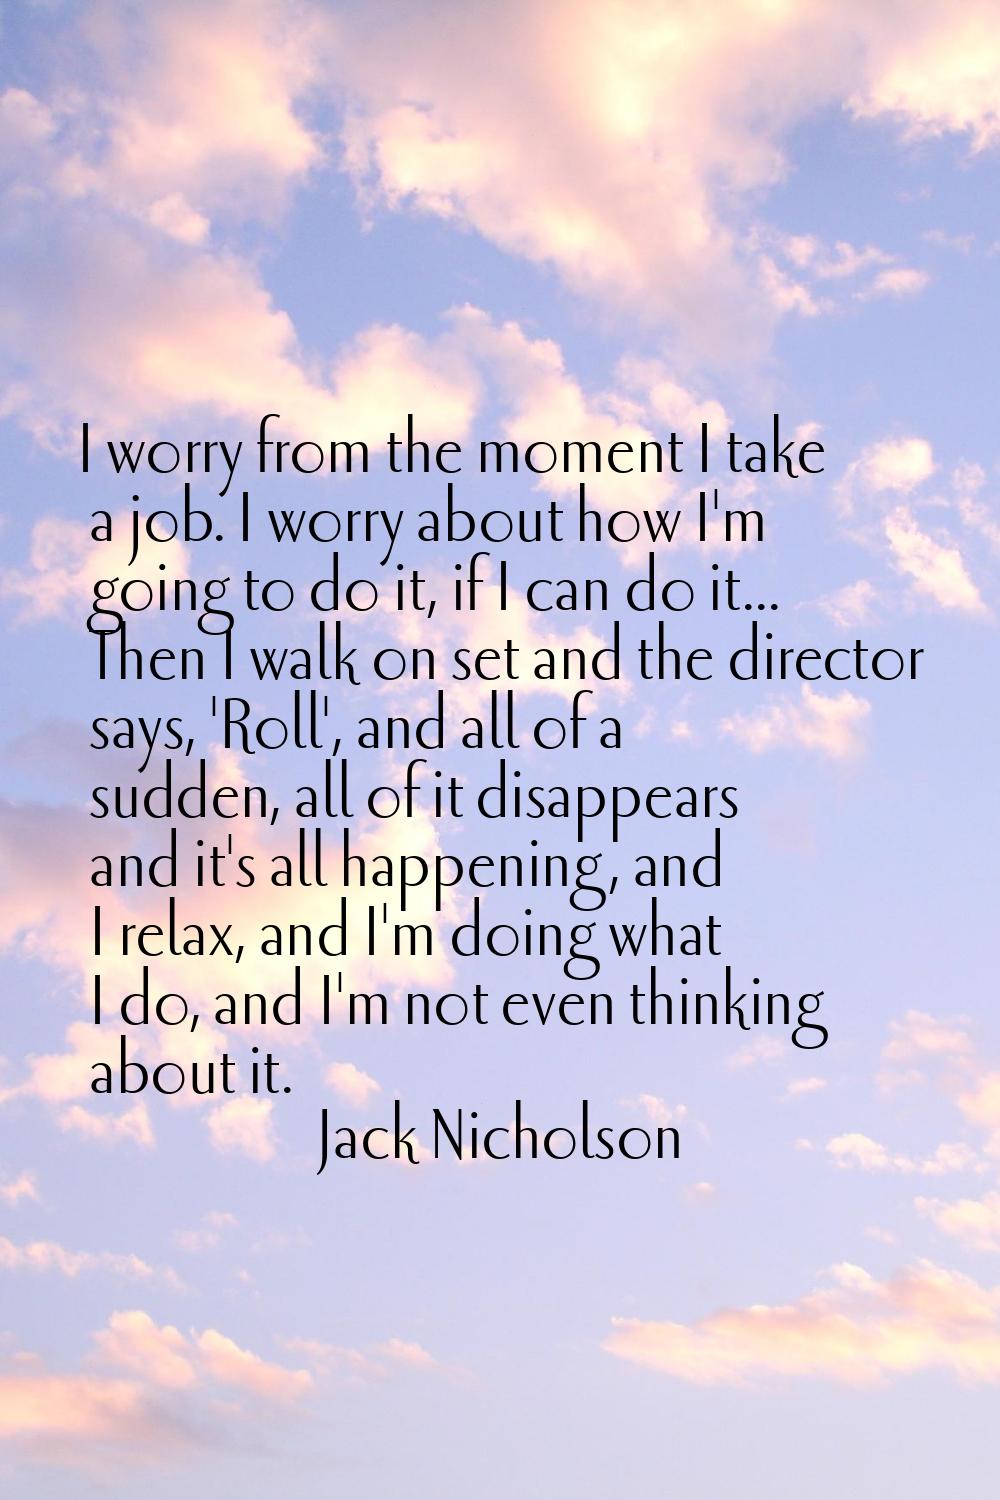 I worry from the moment I take a job. I worry about how I'm going to do it, if I can do it... Then 